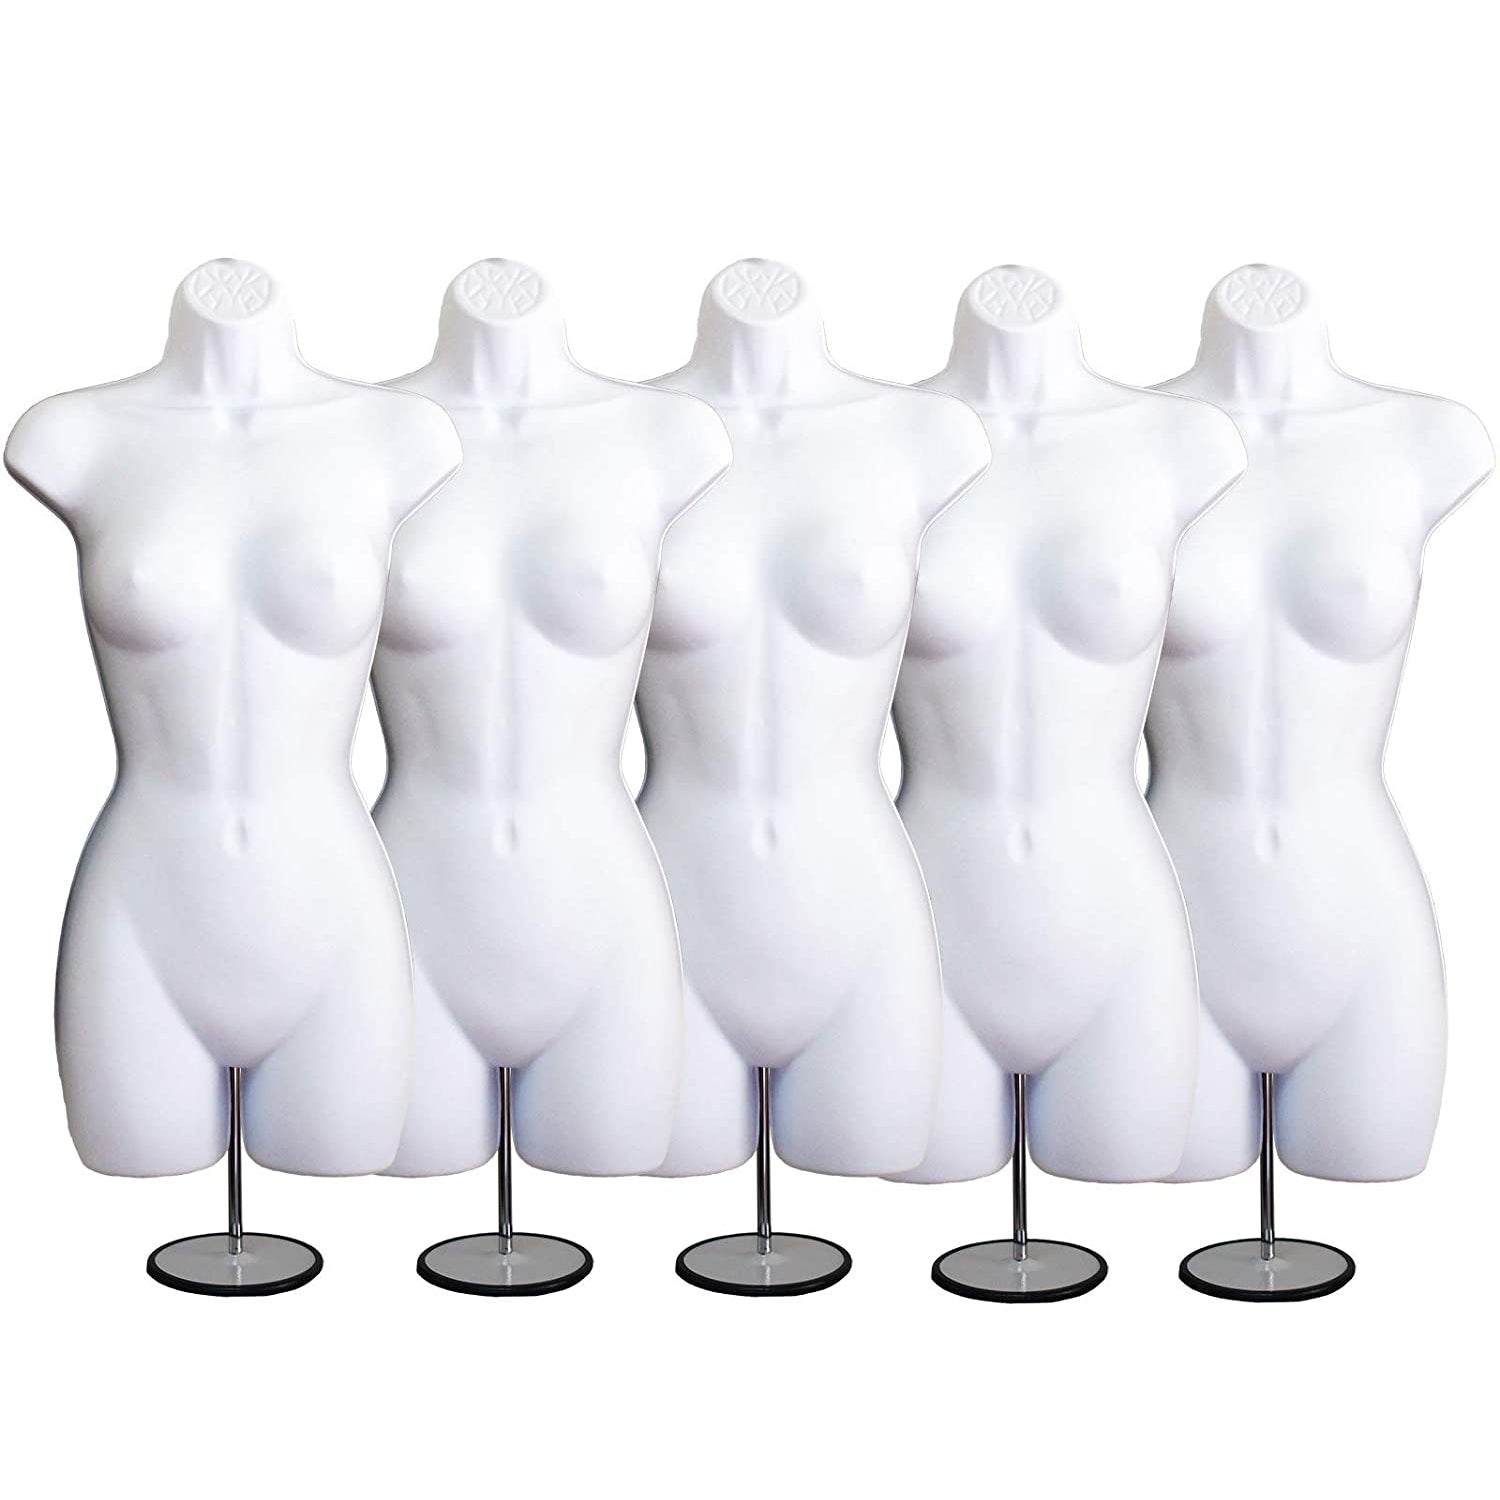 DisplayTown Female Torso Body Mannequin Form (Waist Long) Great for Small and Medium Sizes, Flesh